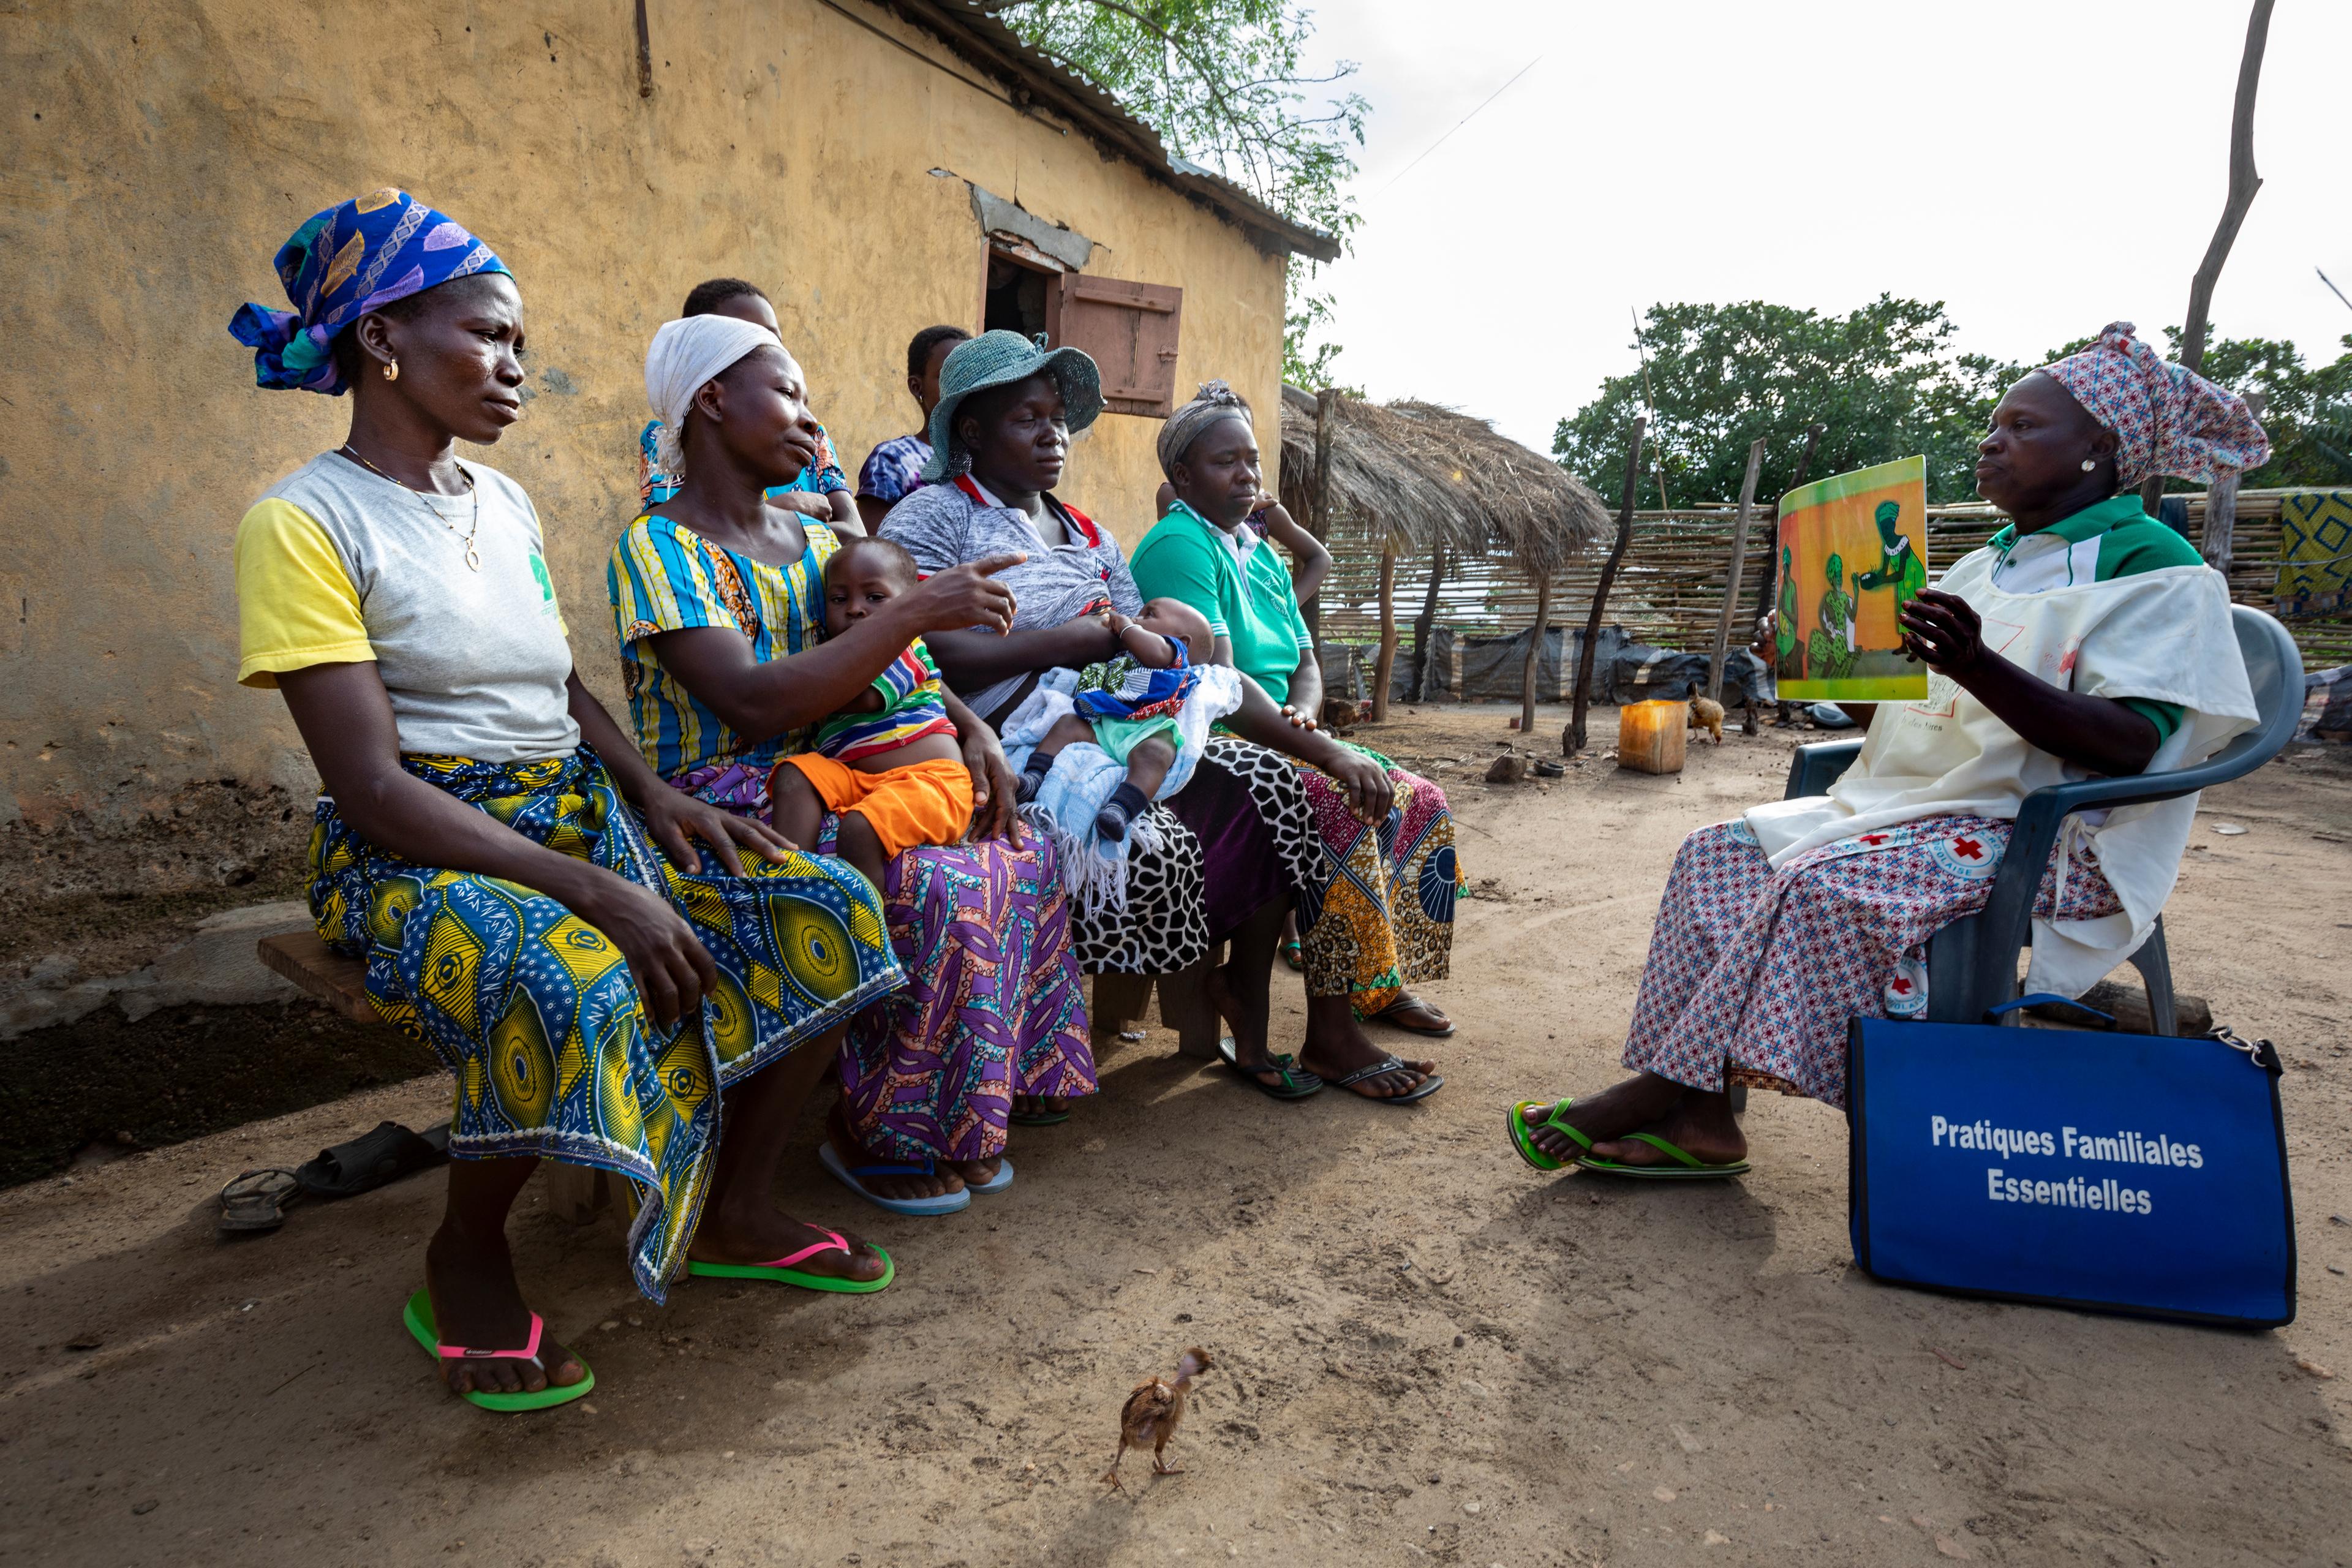 Four African women sit on a wooden bench in front of a mud hut. Two are carrying babies. Opposite them sits a woman wearing a Red Cross vest. She shows the women an illustration of a village scene with mothers and other women.